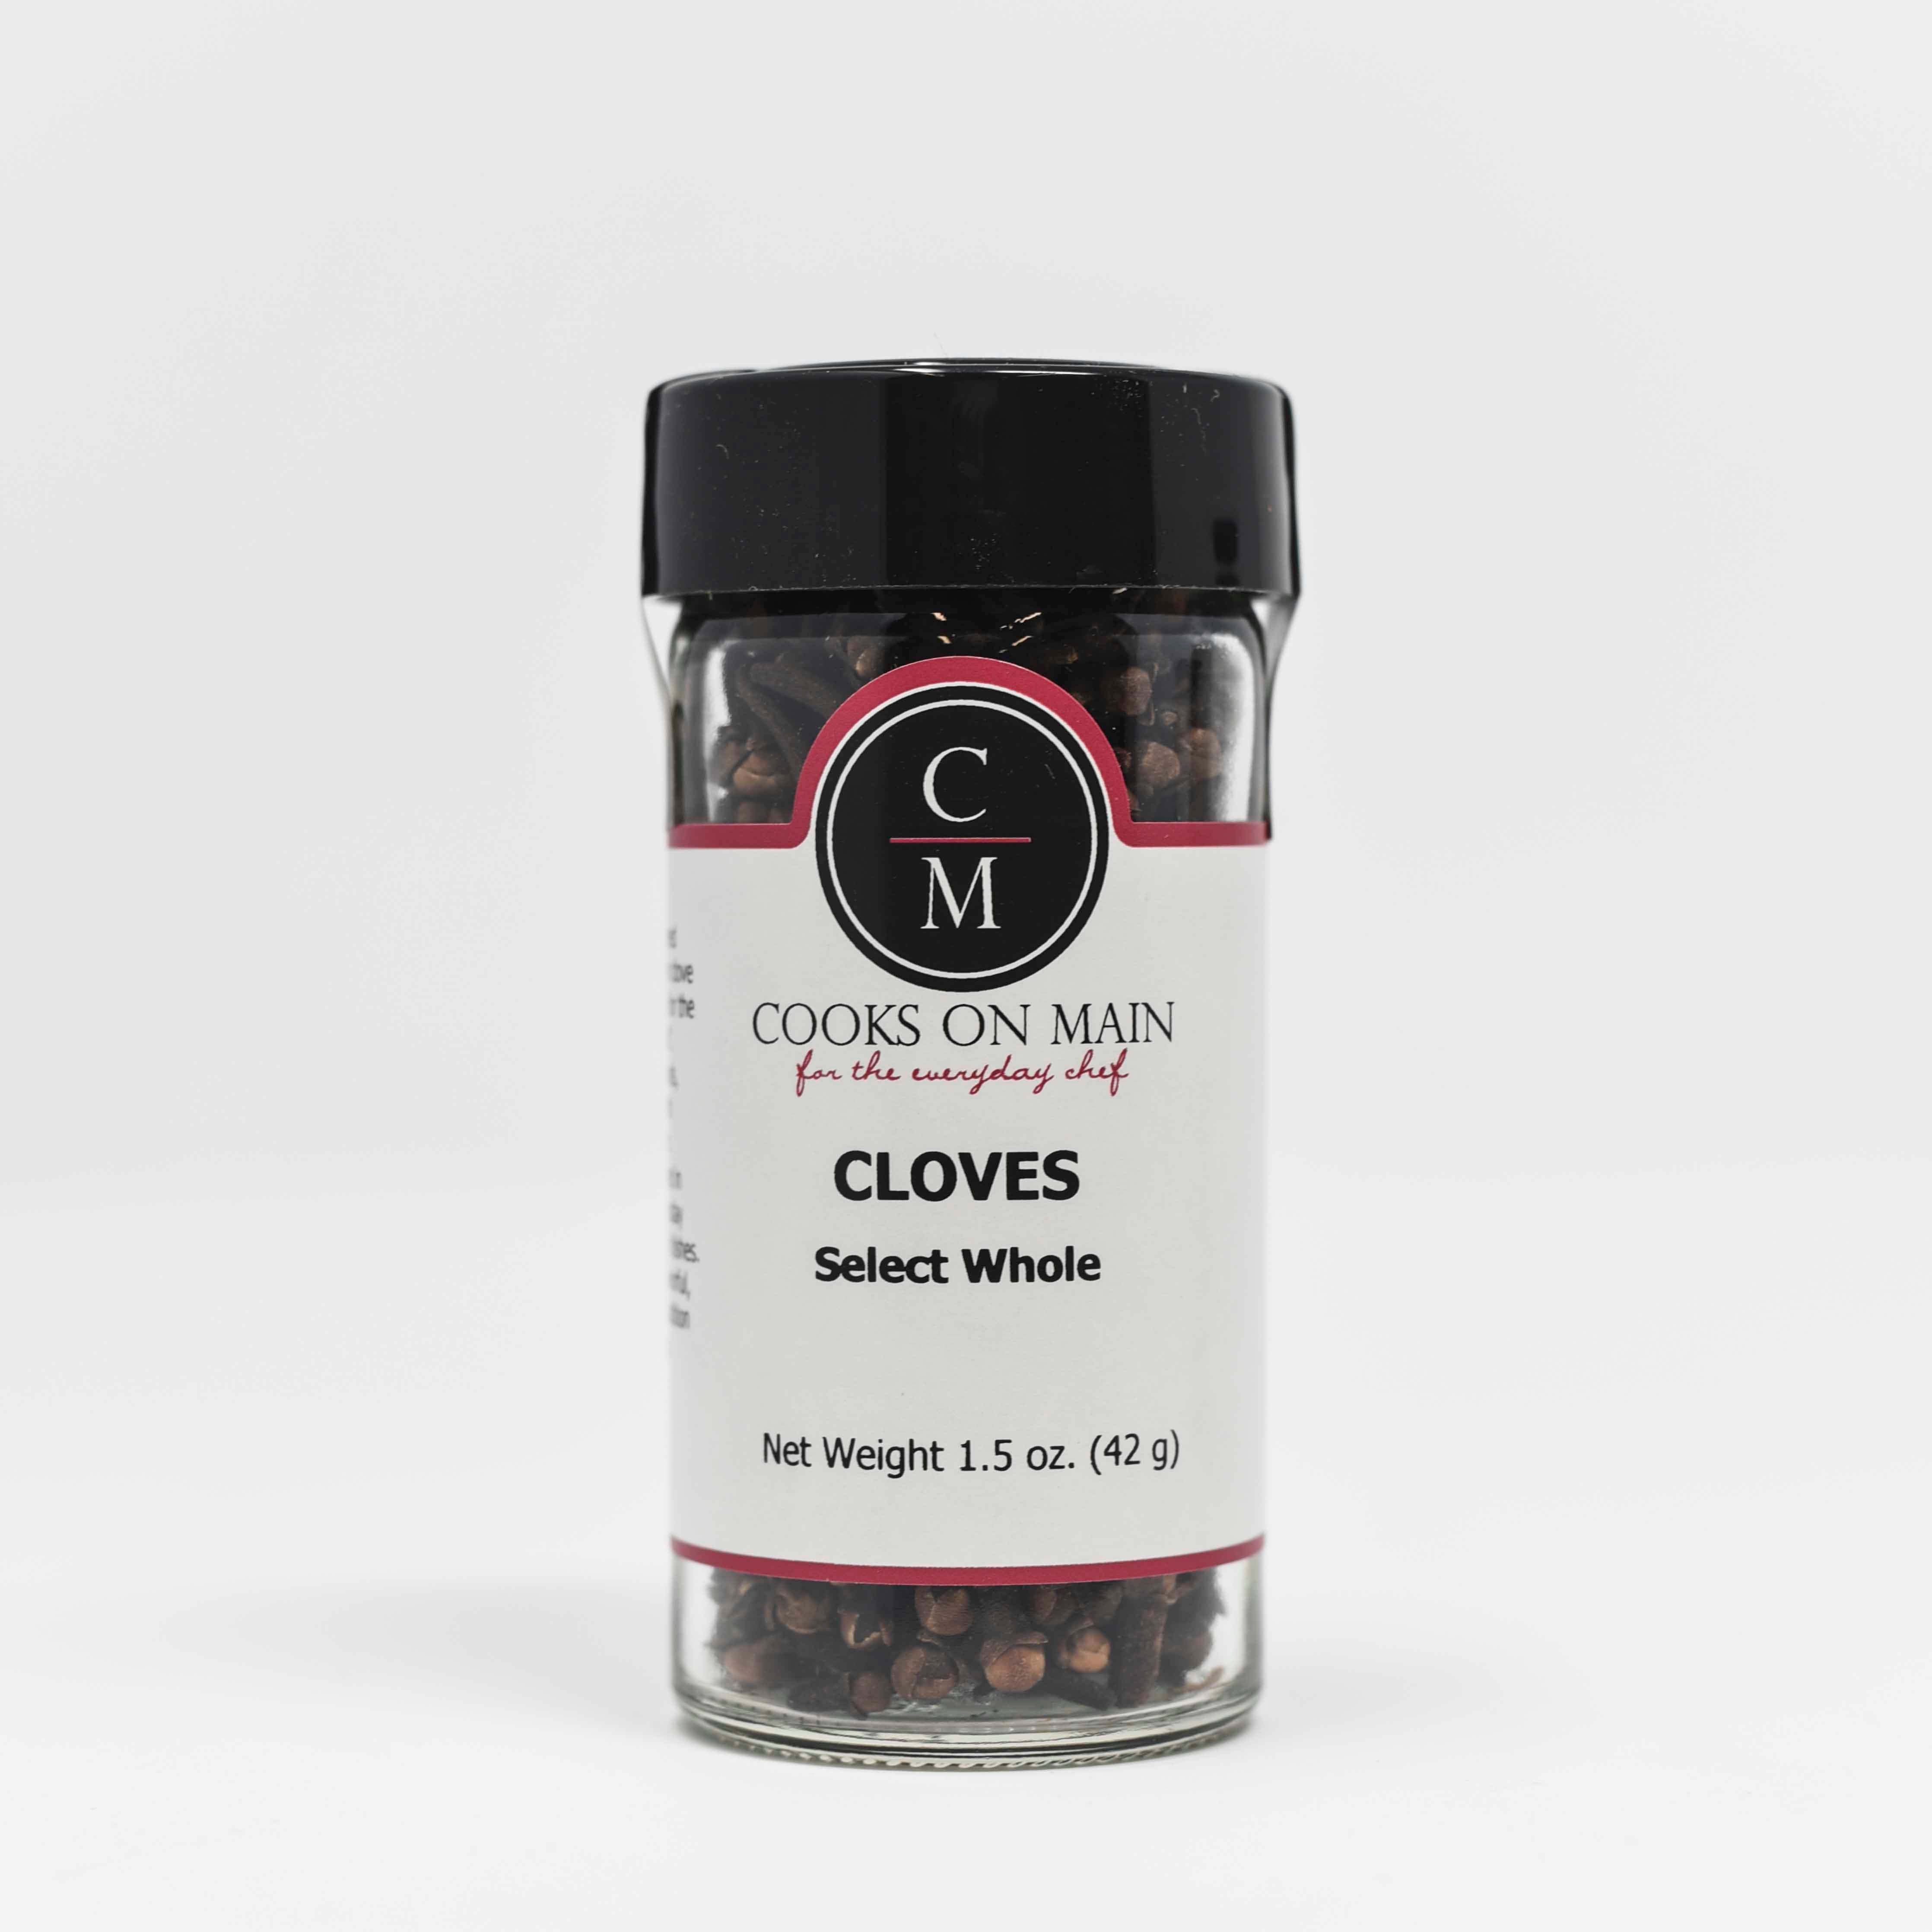 https://cdn.shopify.com/s/files/1/0347/1700/8005/products/cloves_whole.jpg?v=1593102130&width=4472